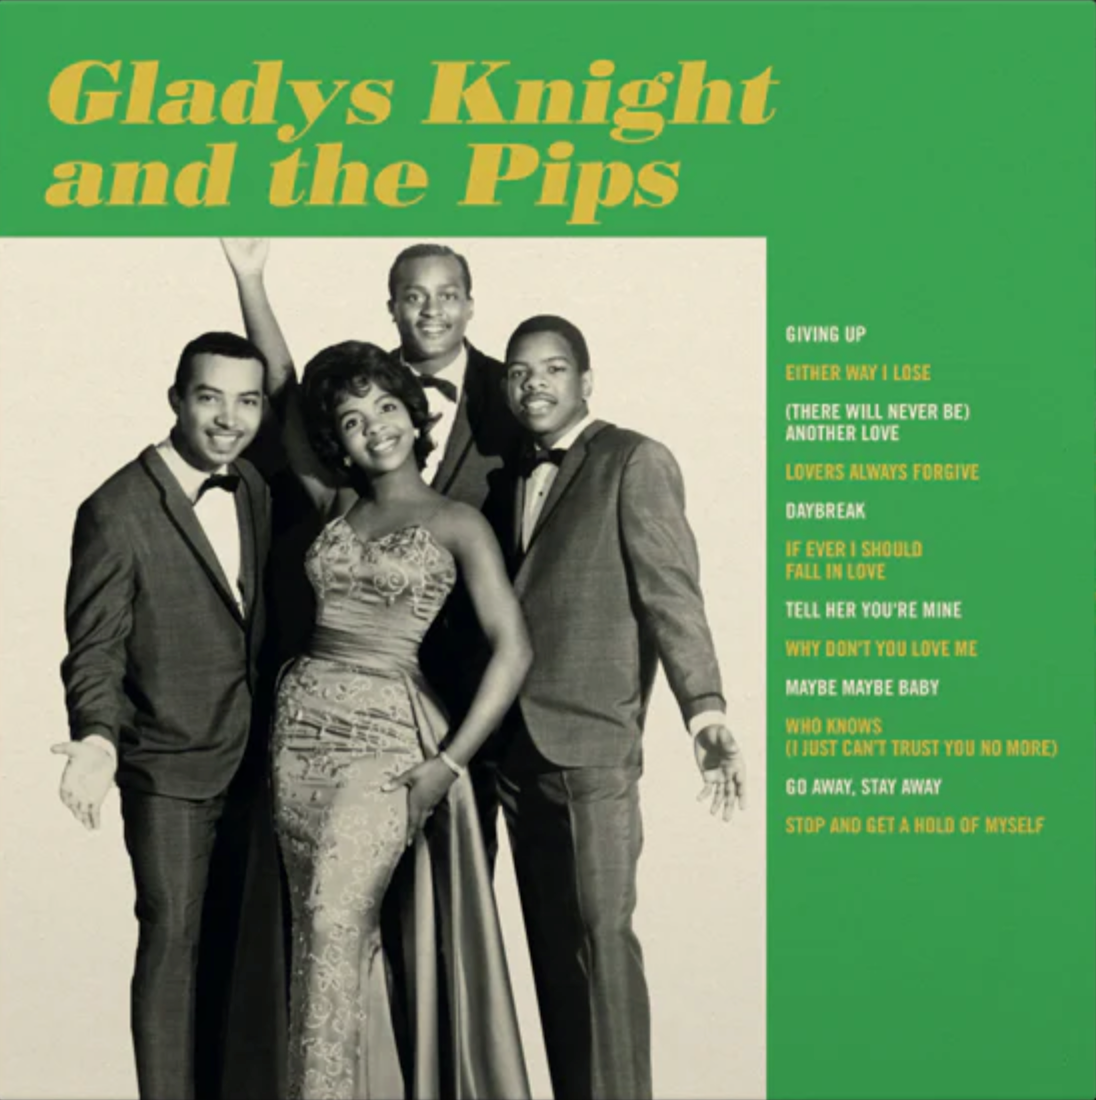 Gladys Knight and the Pips - Gladys Knight and the Pips